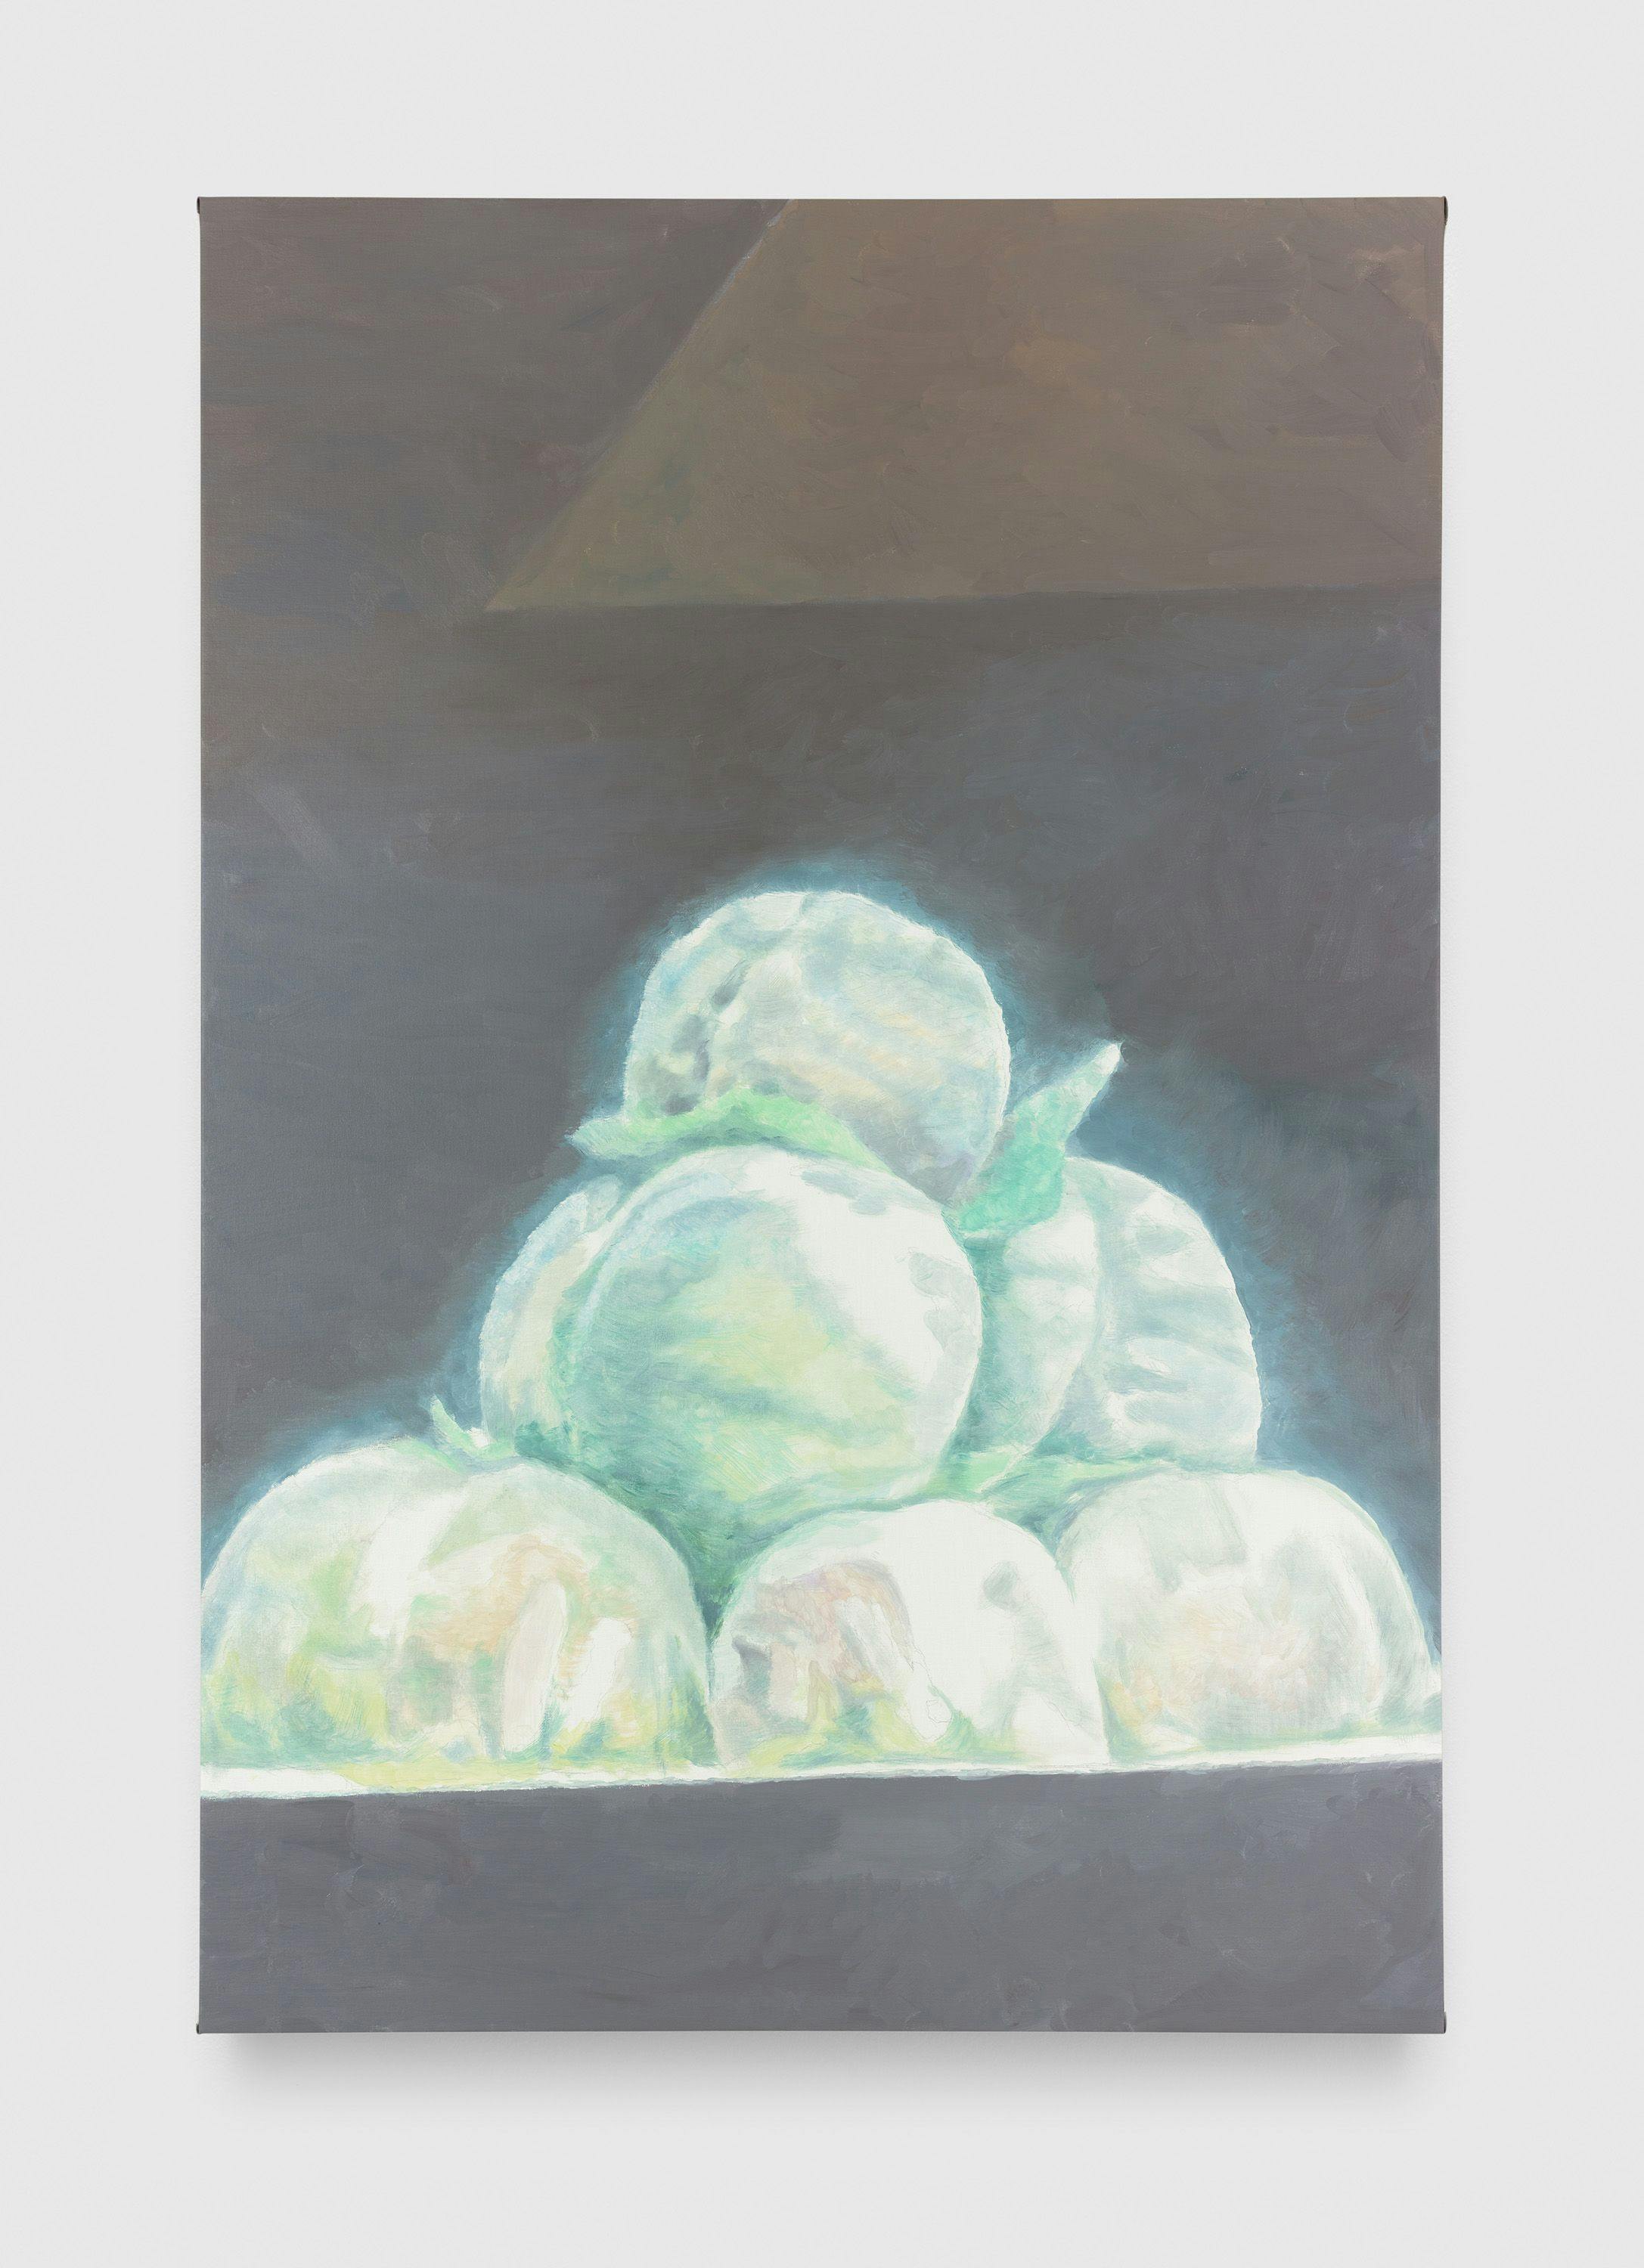 A painting by Luc Tuymans, titled Peaches, dated 2012.